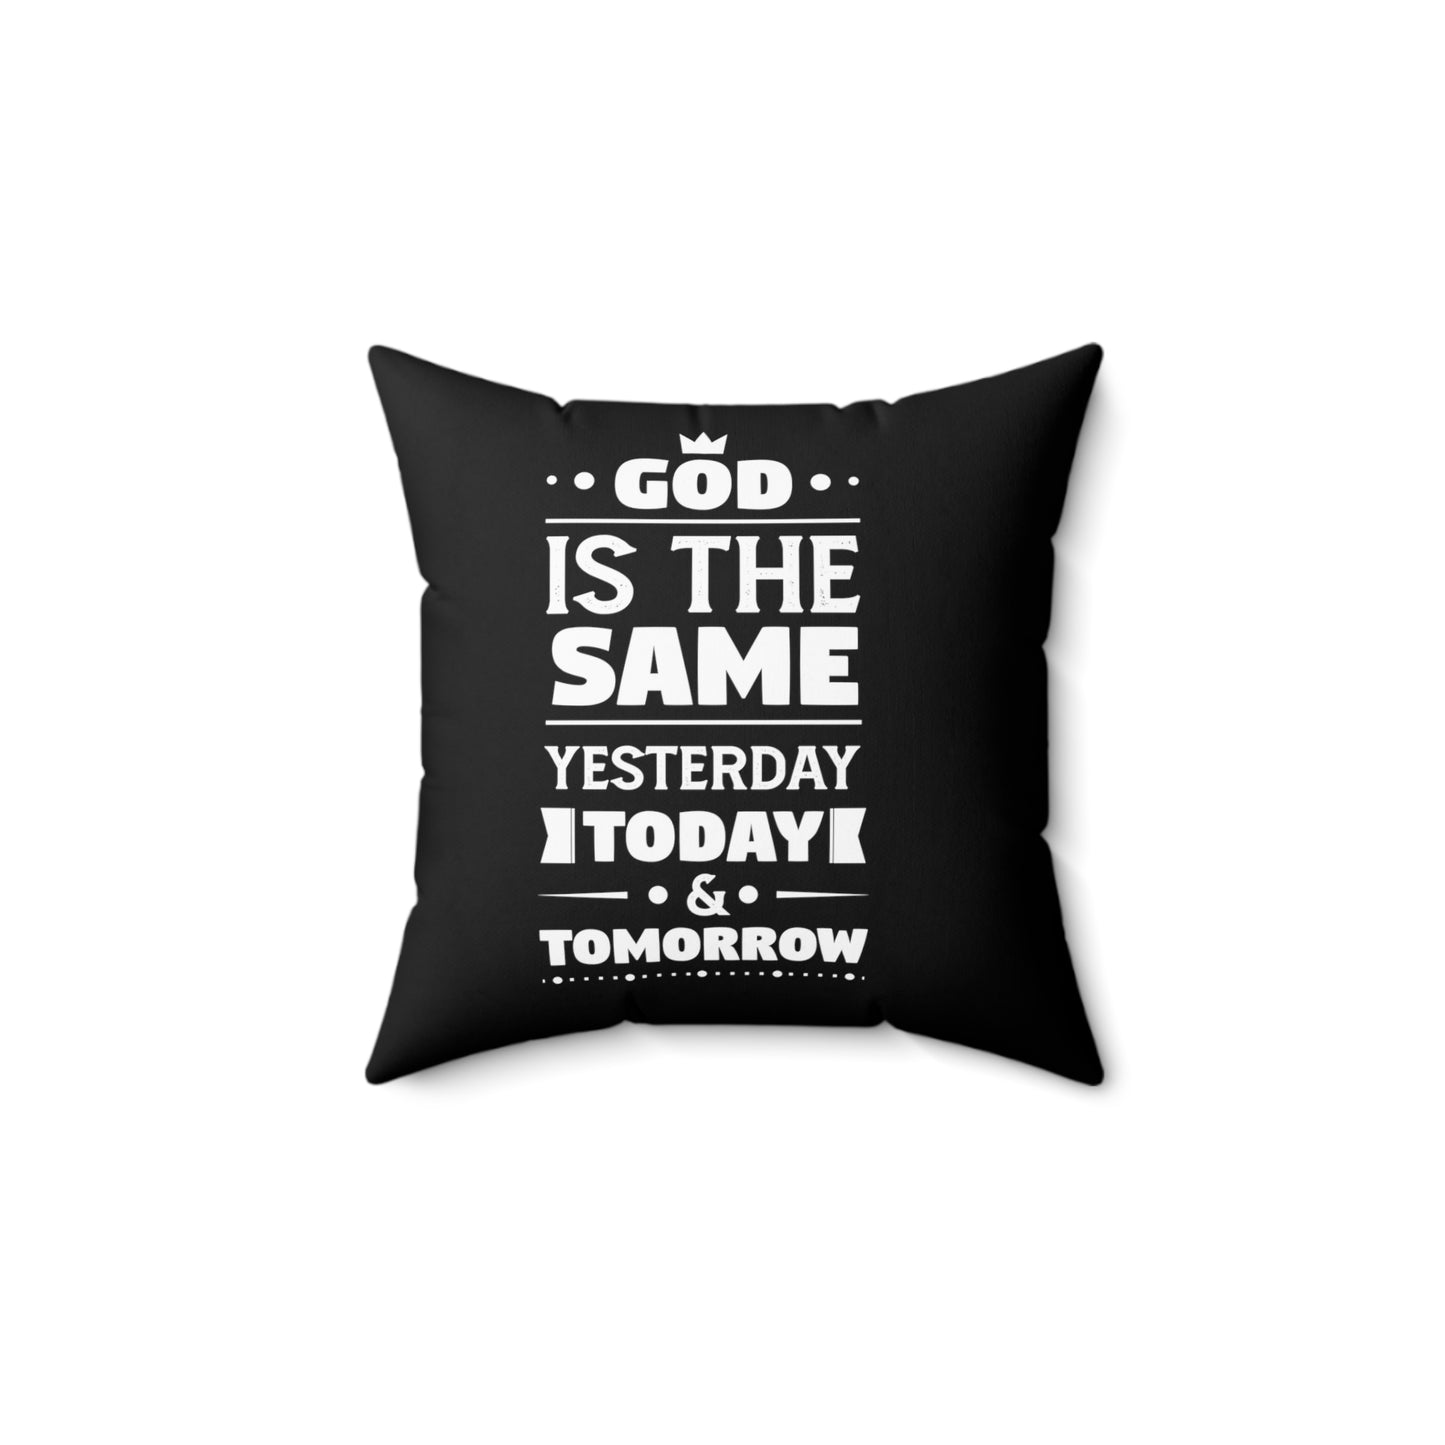 God Is The Same Yesterday Today & Tomorrow Pillow